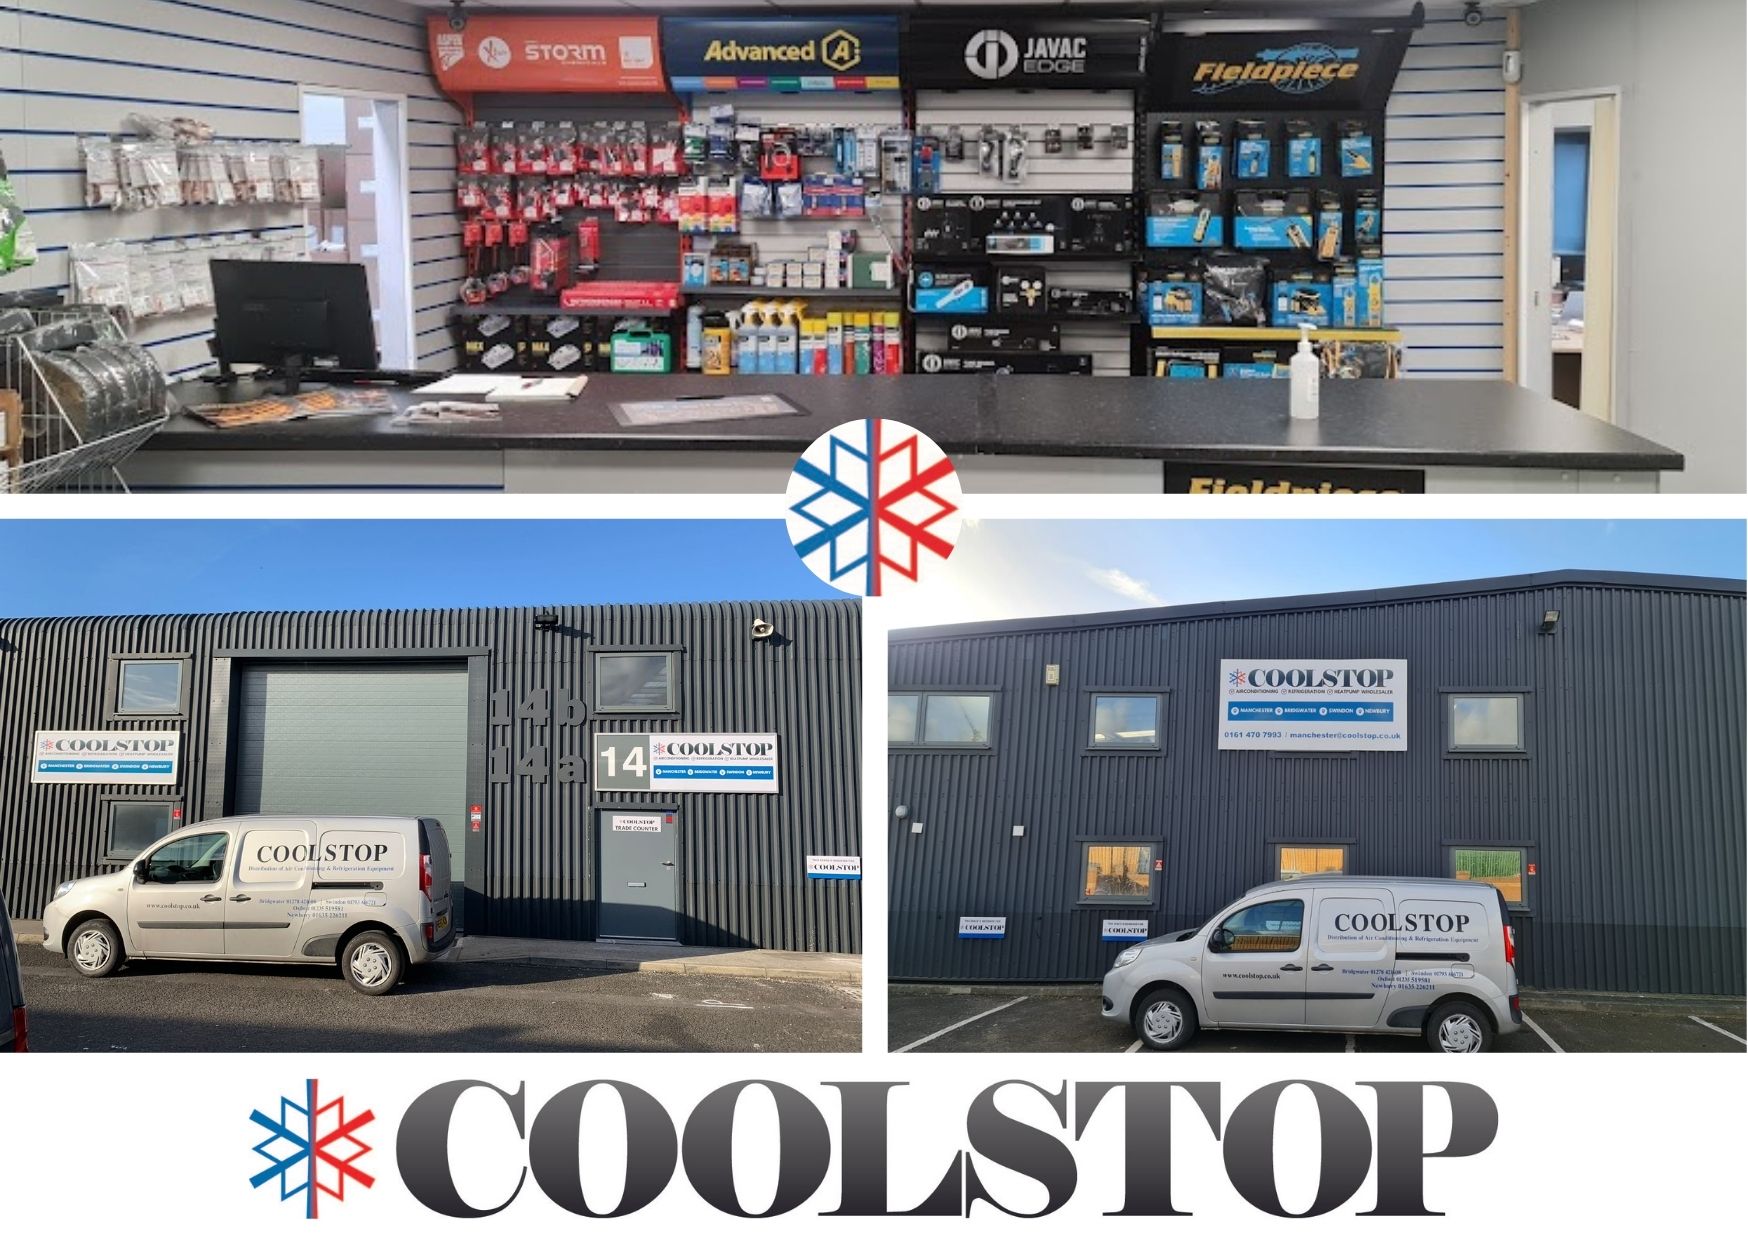 Coolstop opens up in Manchester